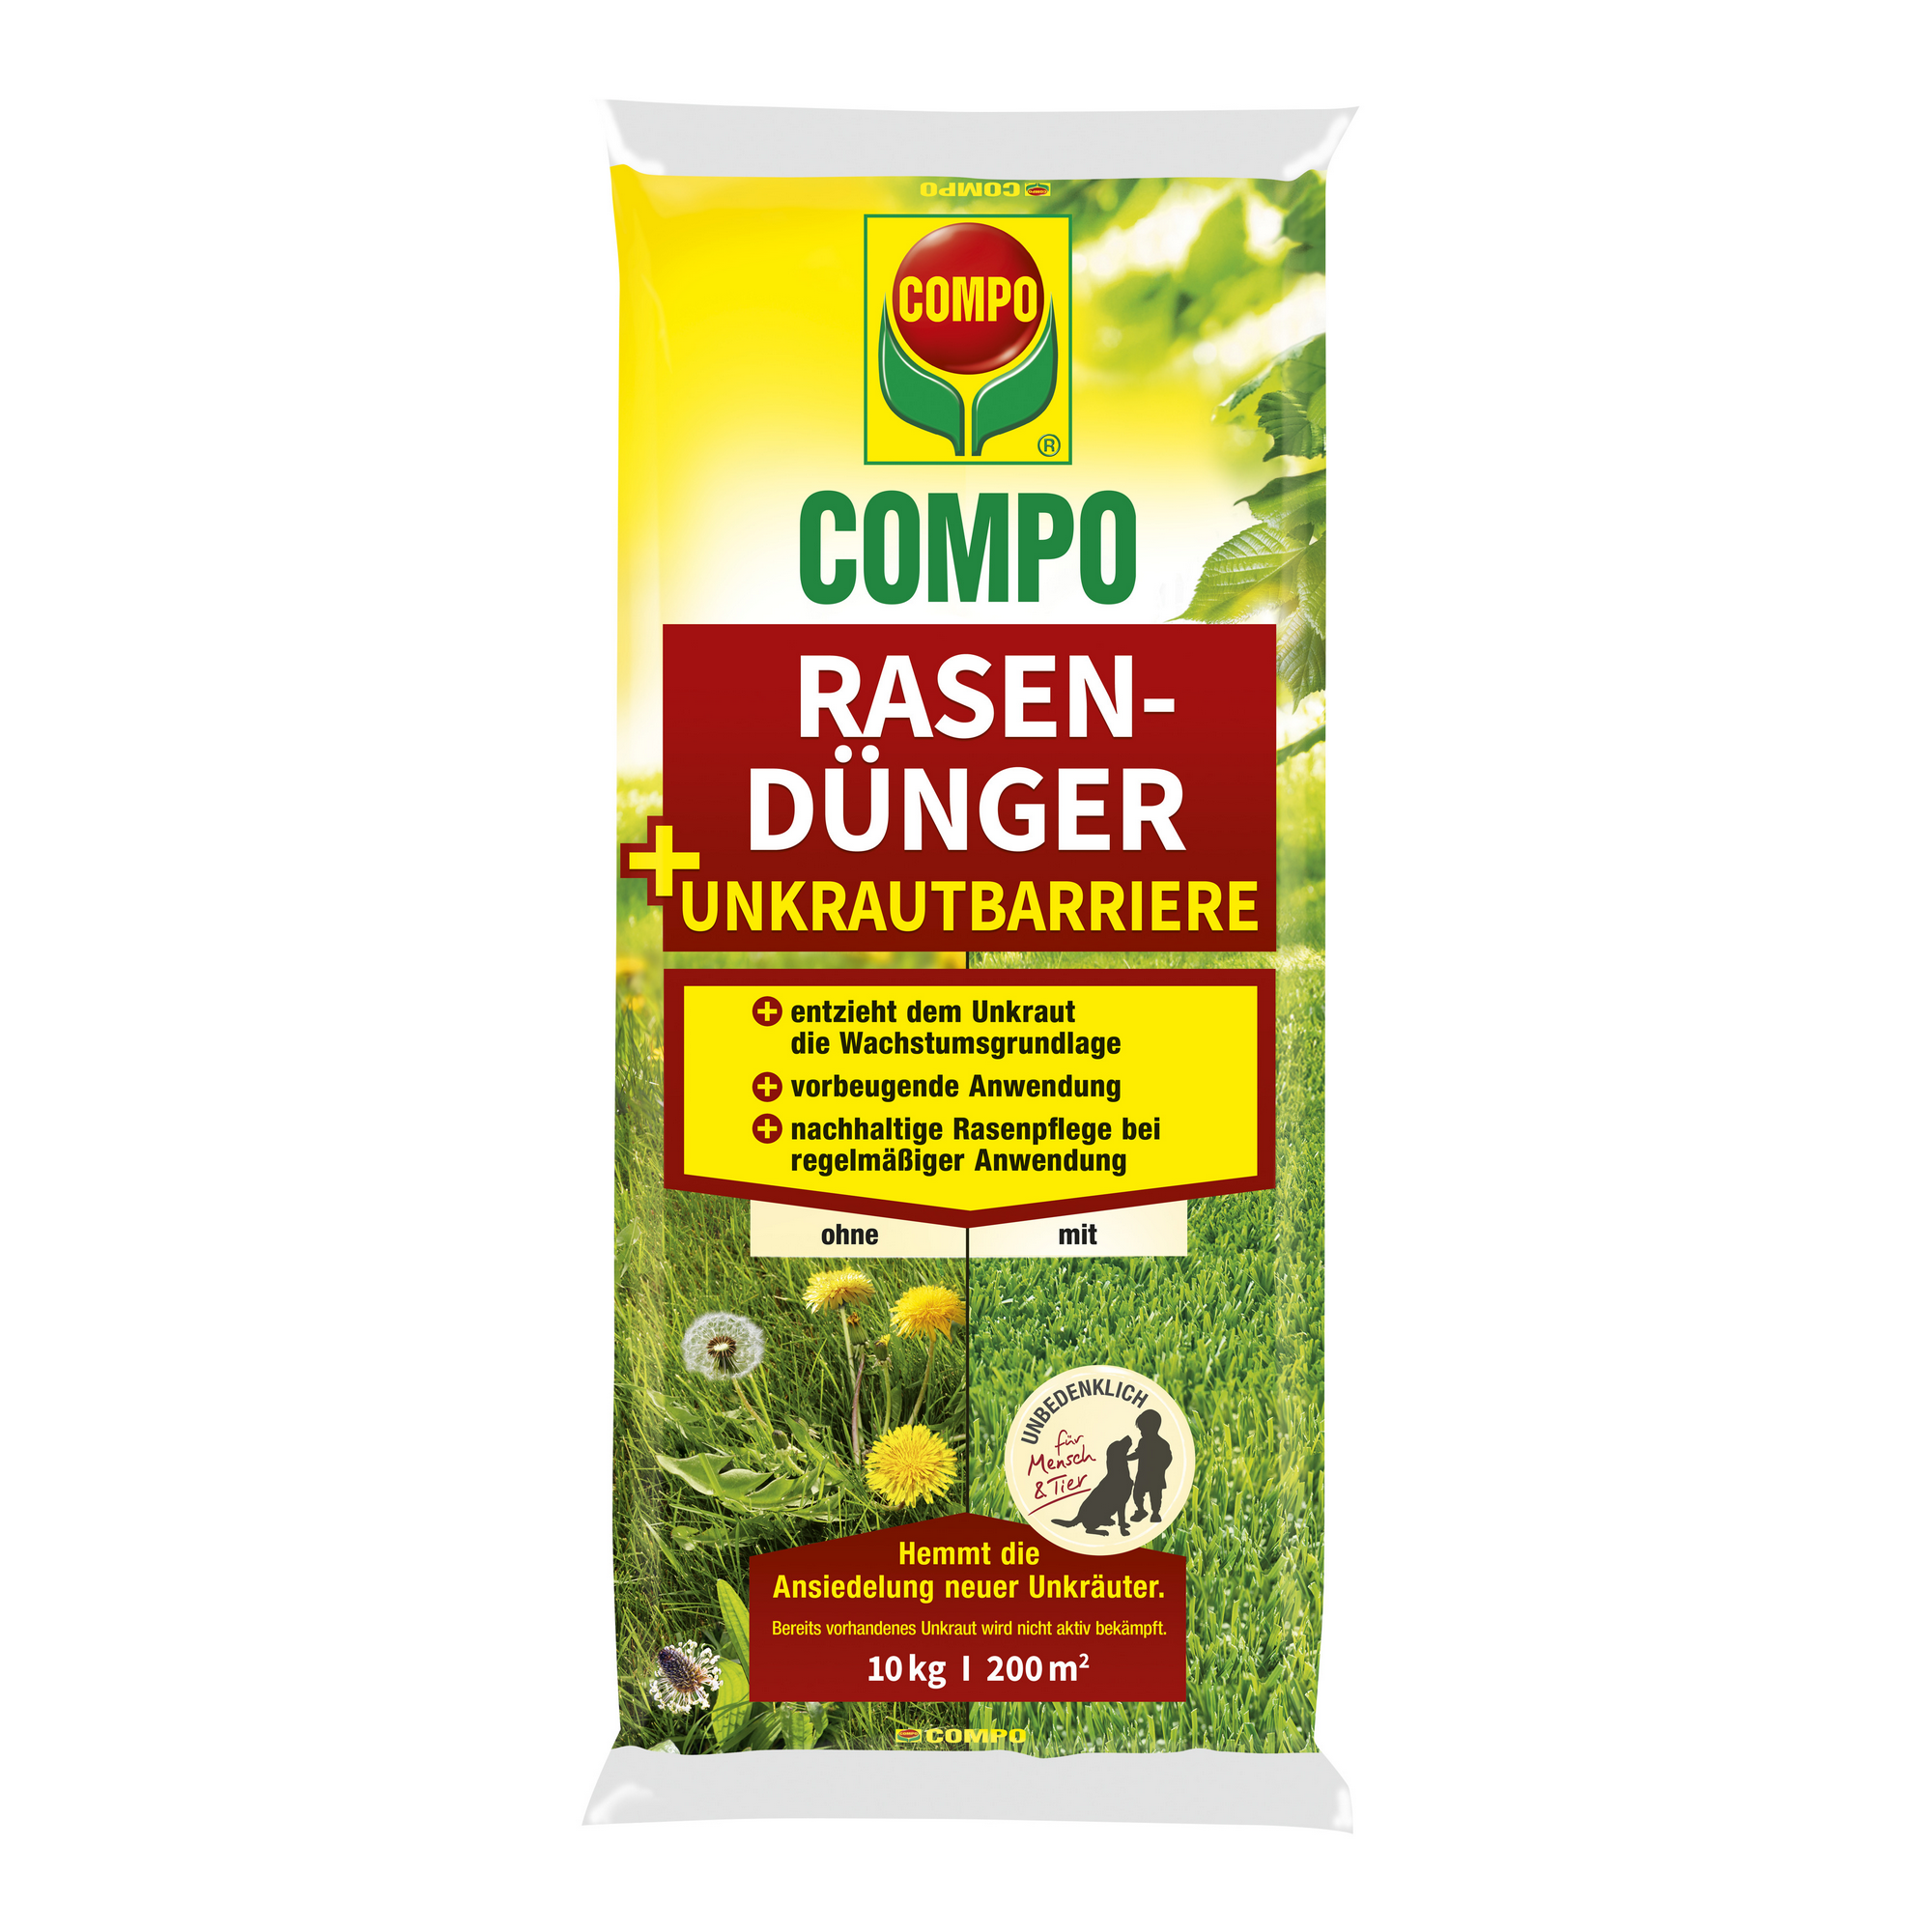 Rasendünger + Unkrautbarriere 10 kg + product picture